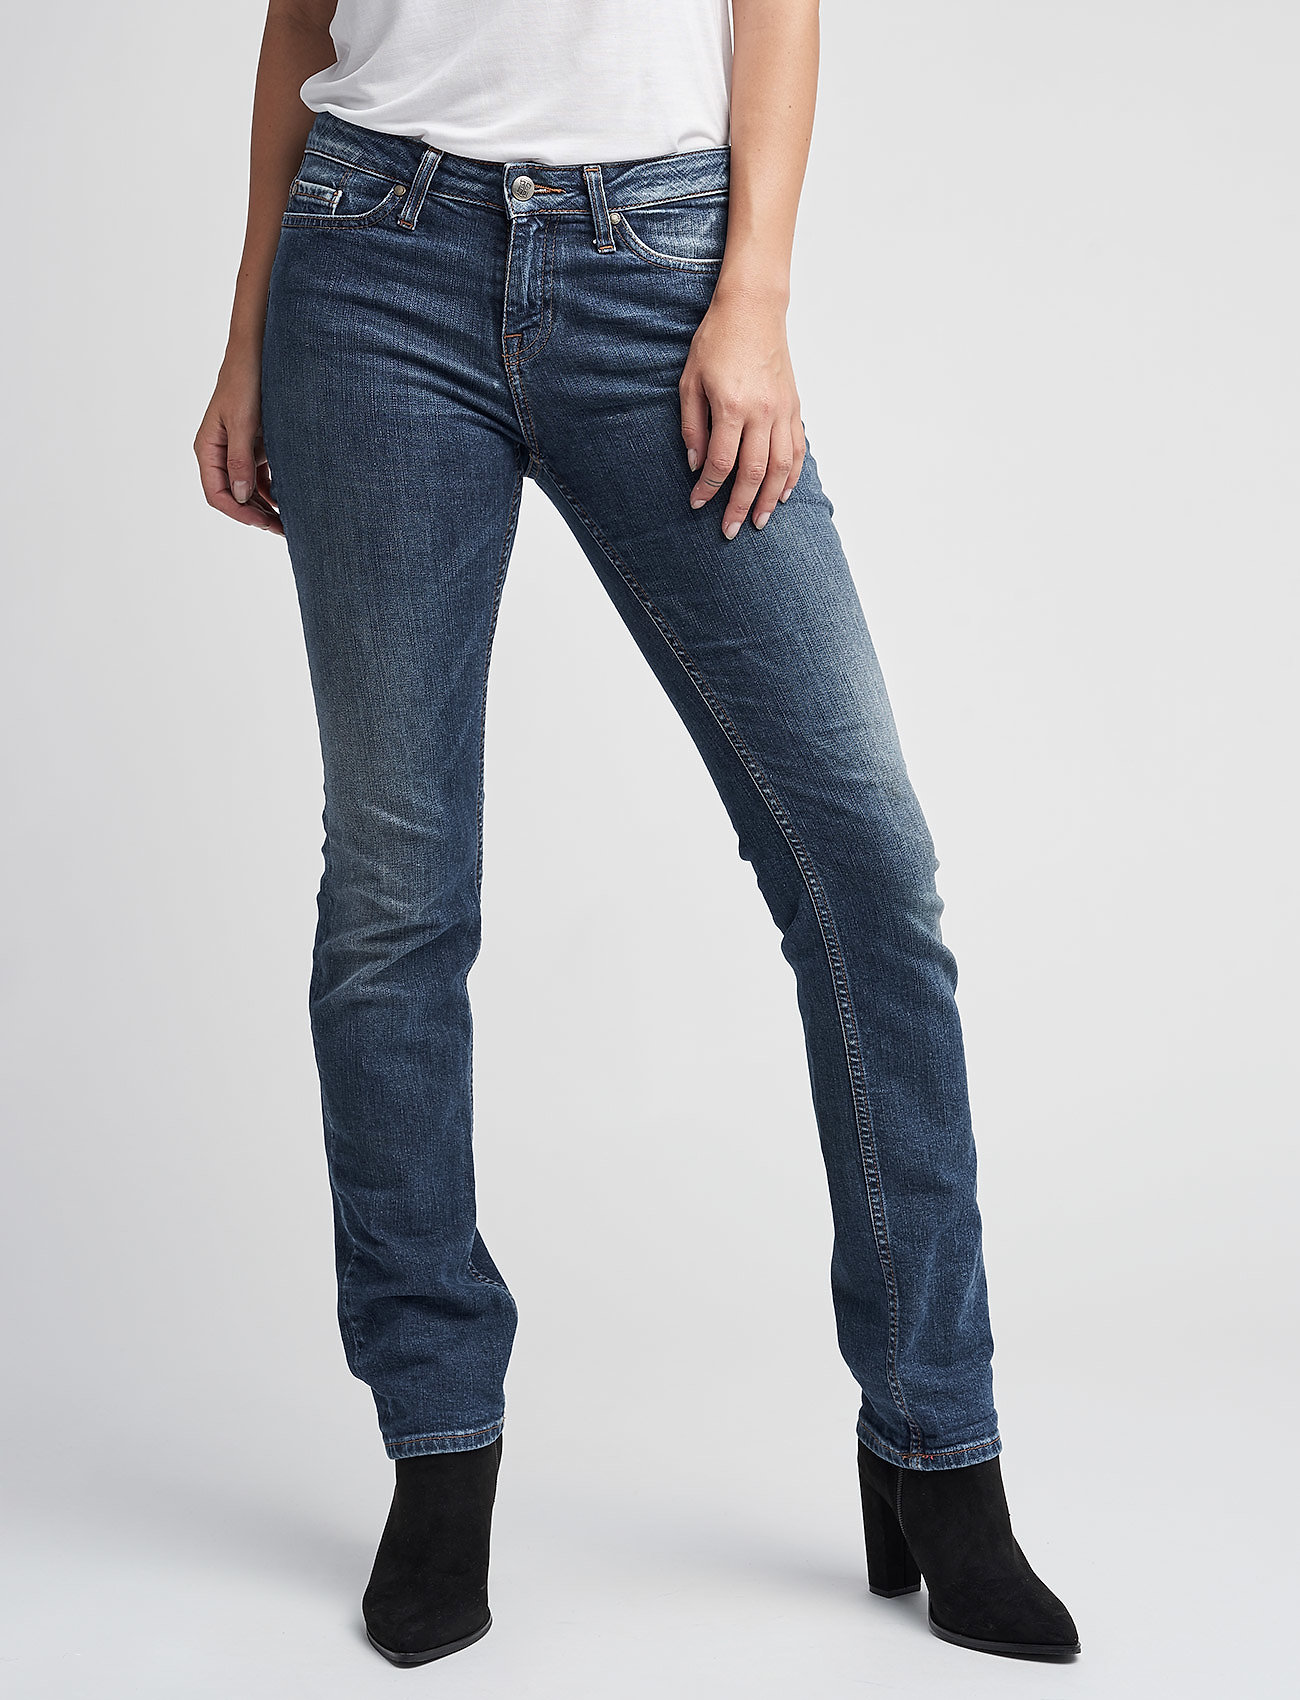 Tommy Hilfiger Women's Rome Heritage Straight Fit Jeans